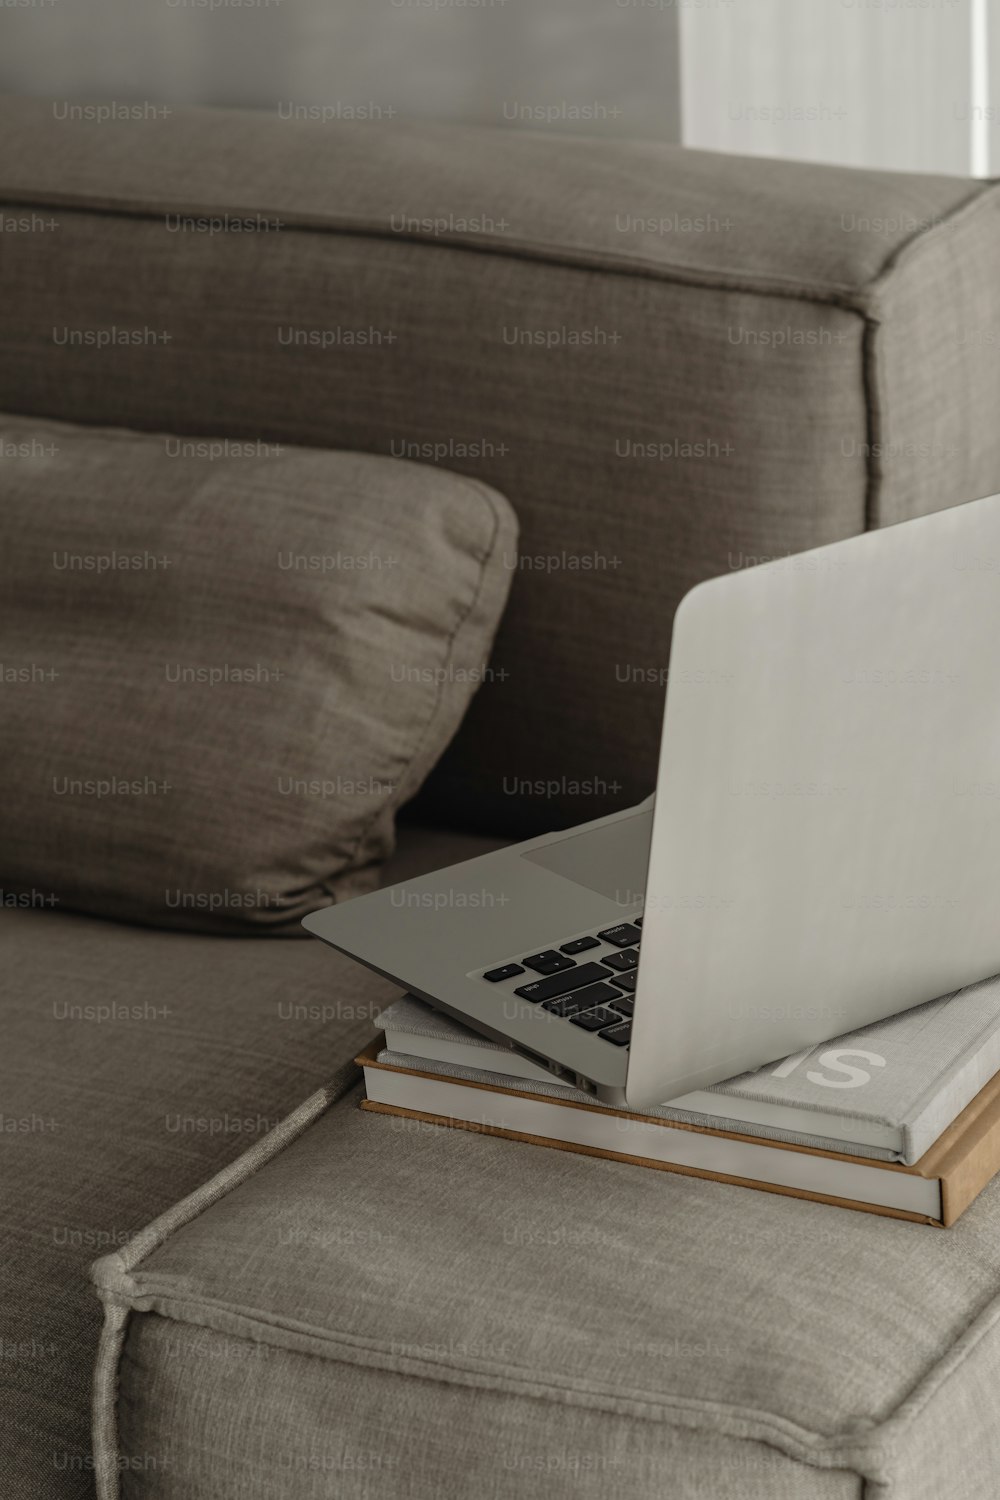 a laptop sitting on top of a book on a couch